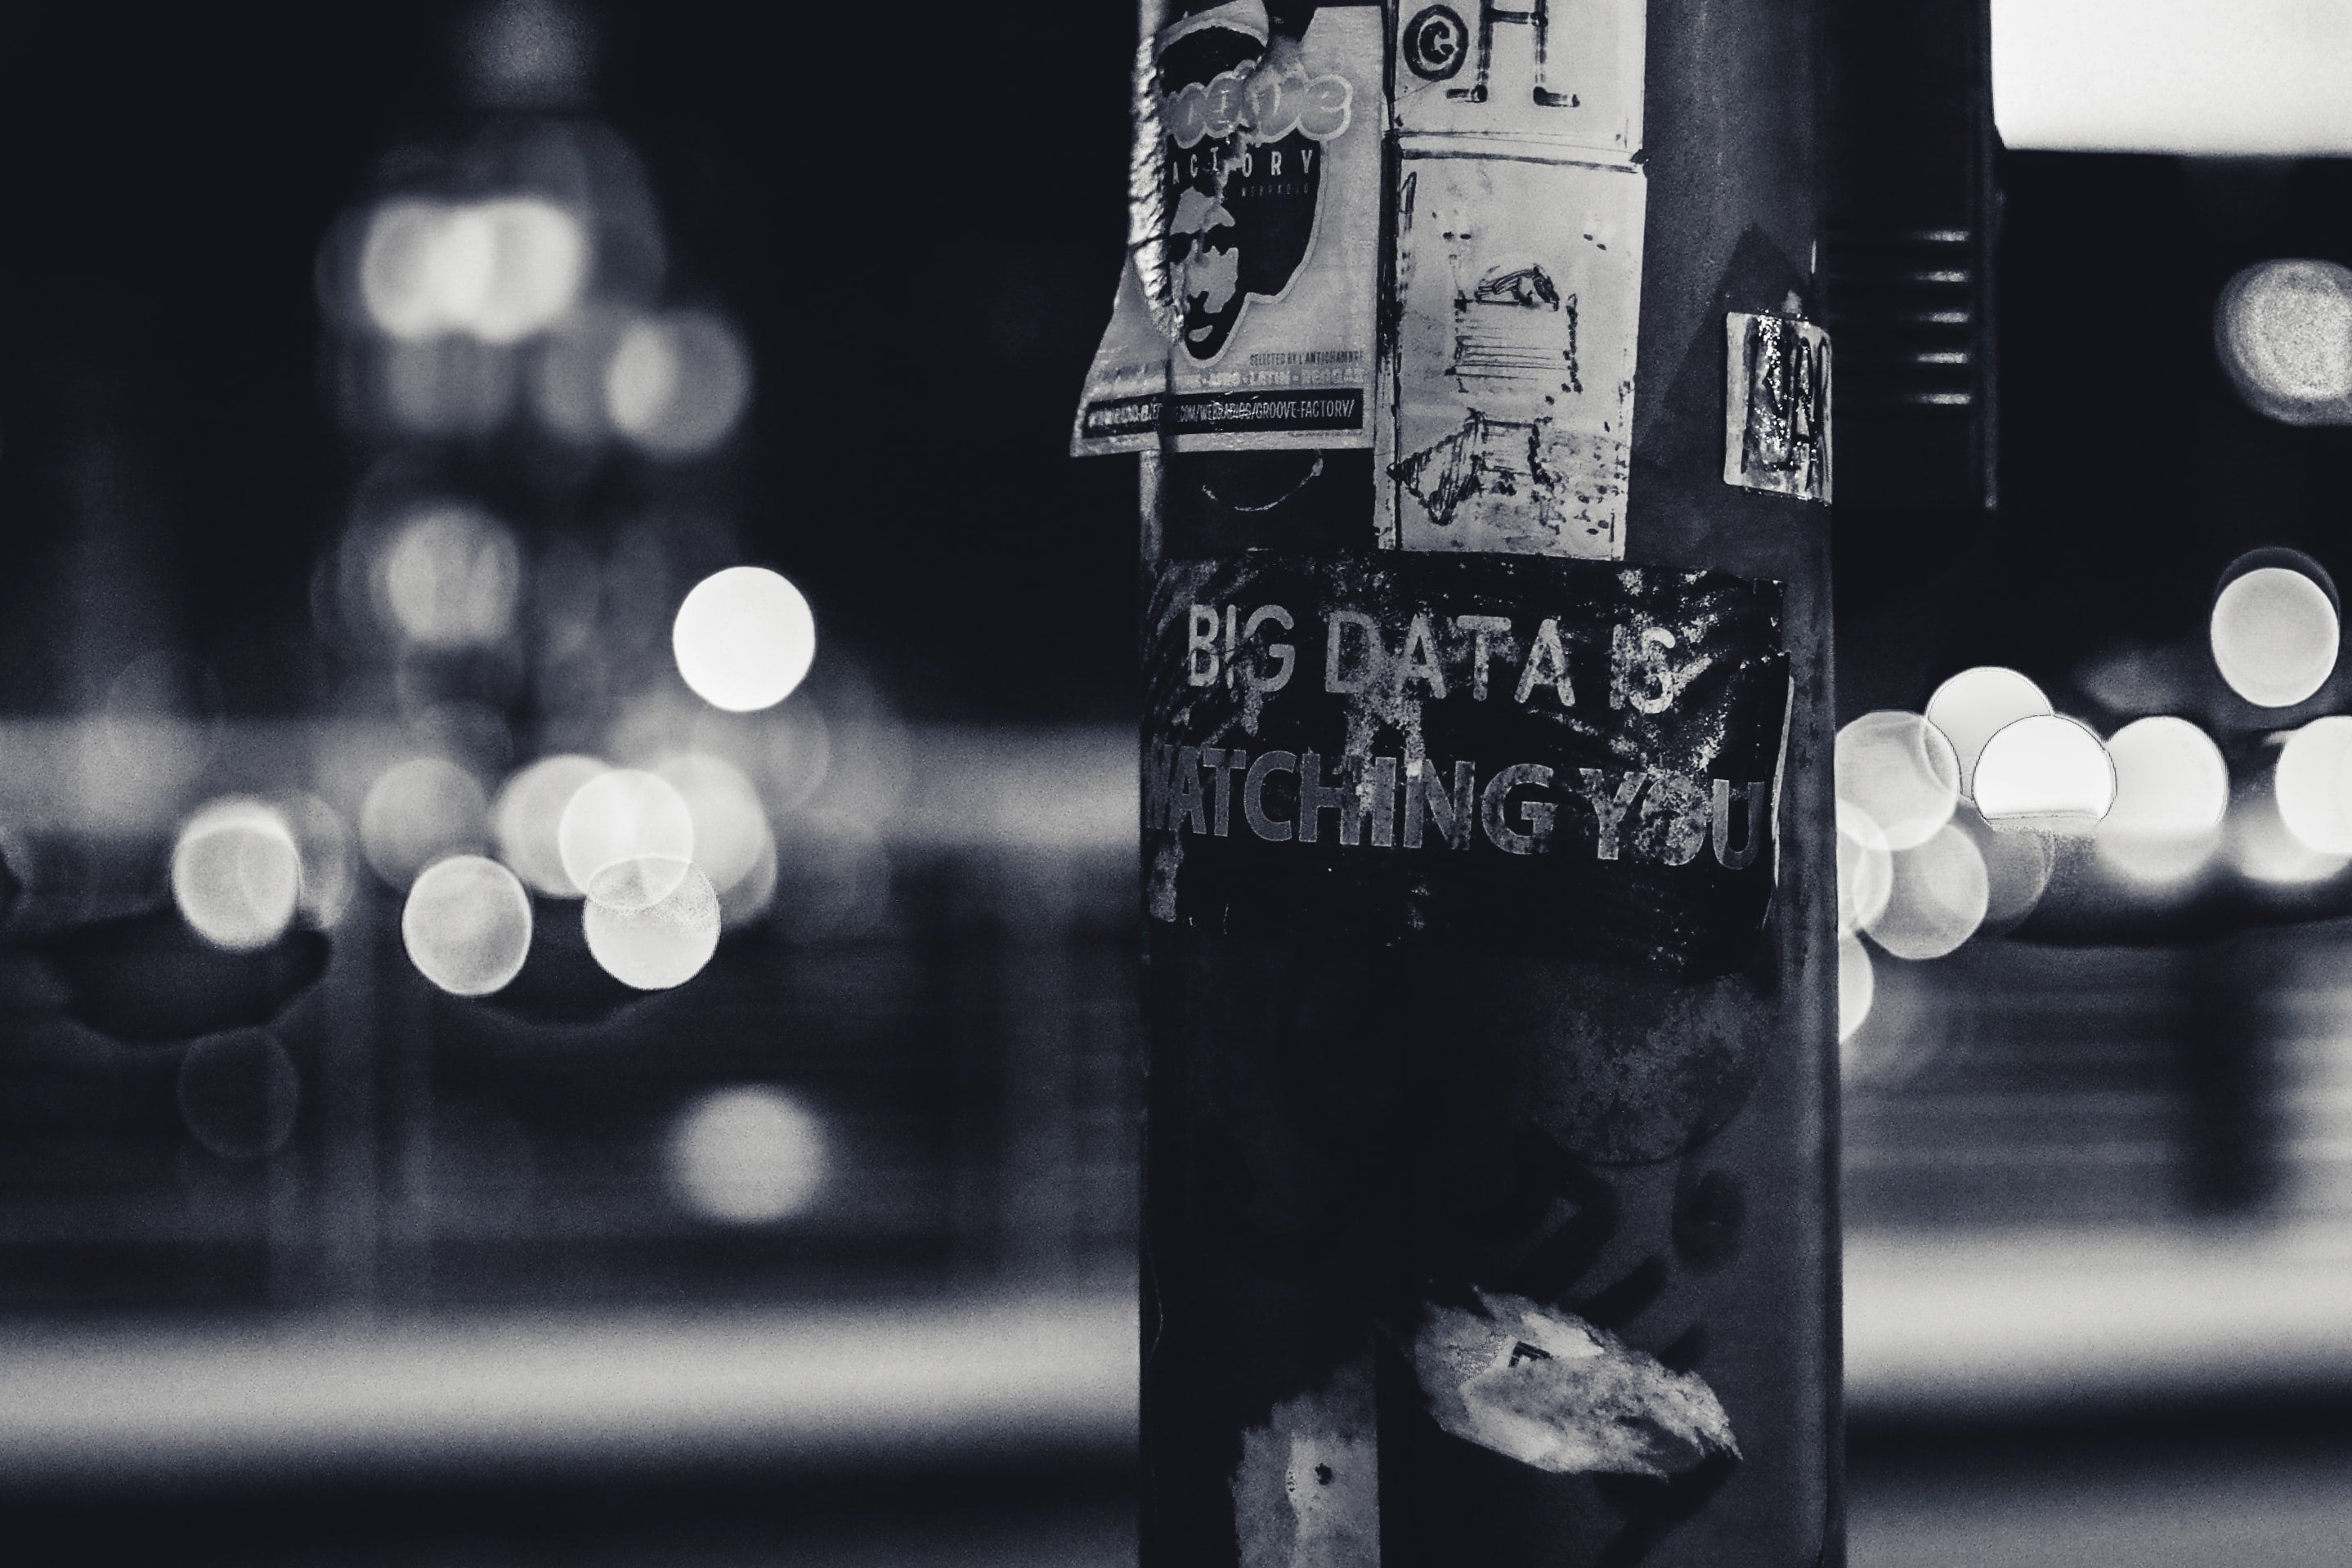 A sticker on a lamppost says "Big data is watching you."